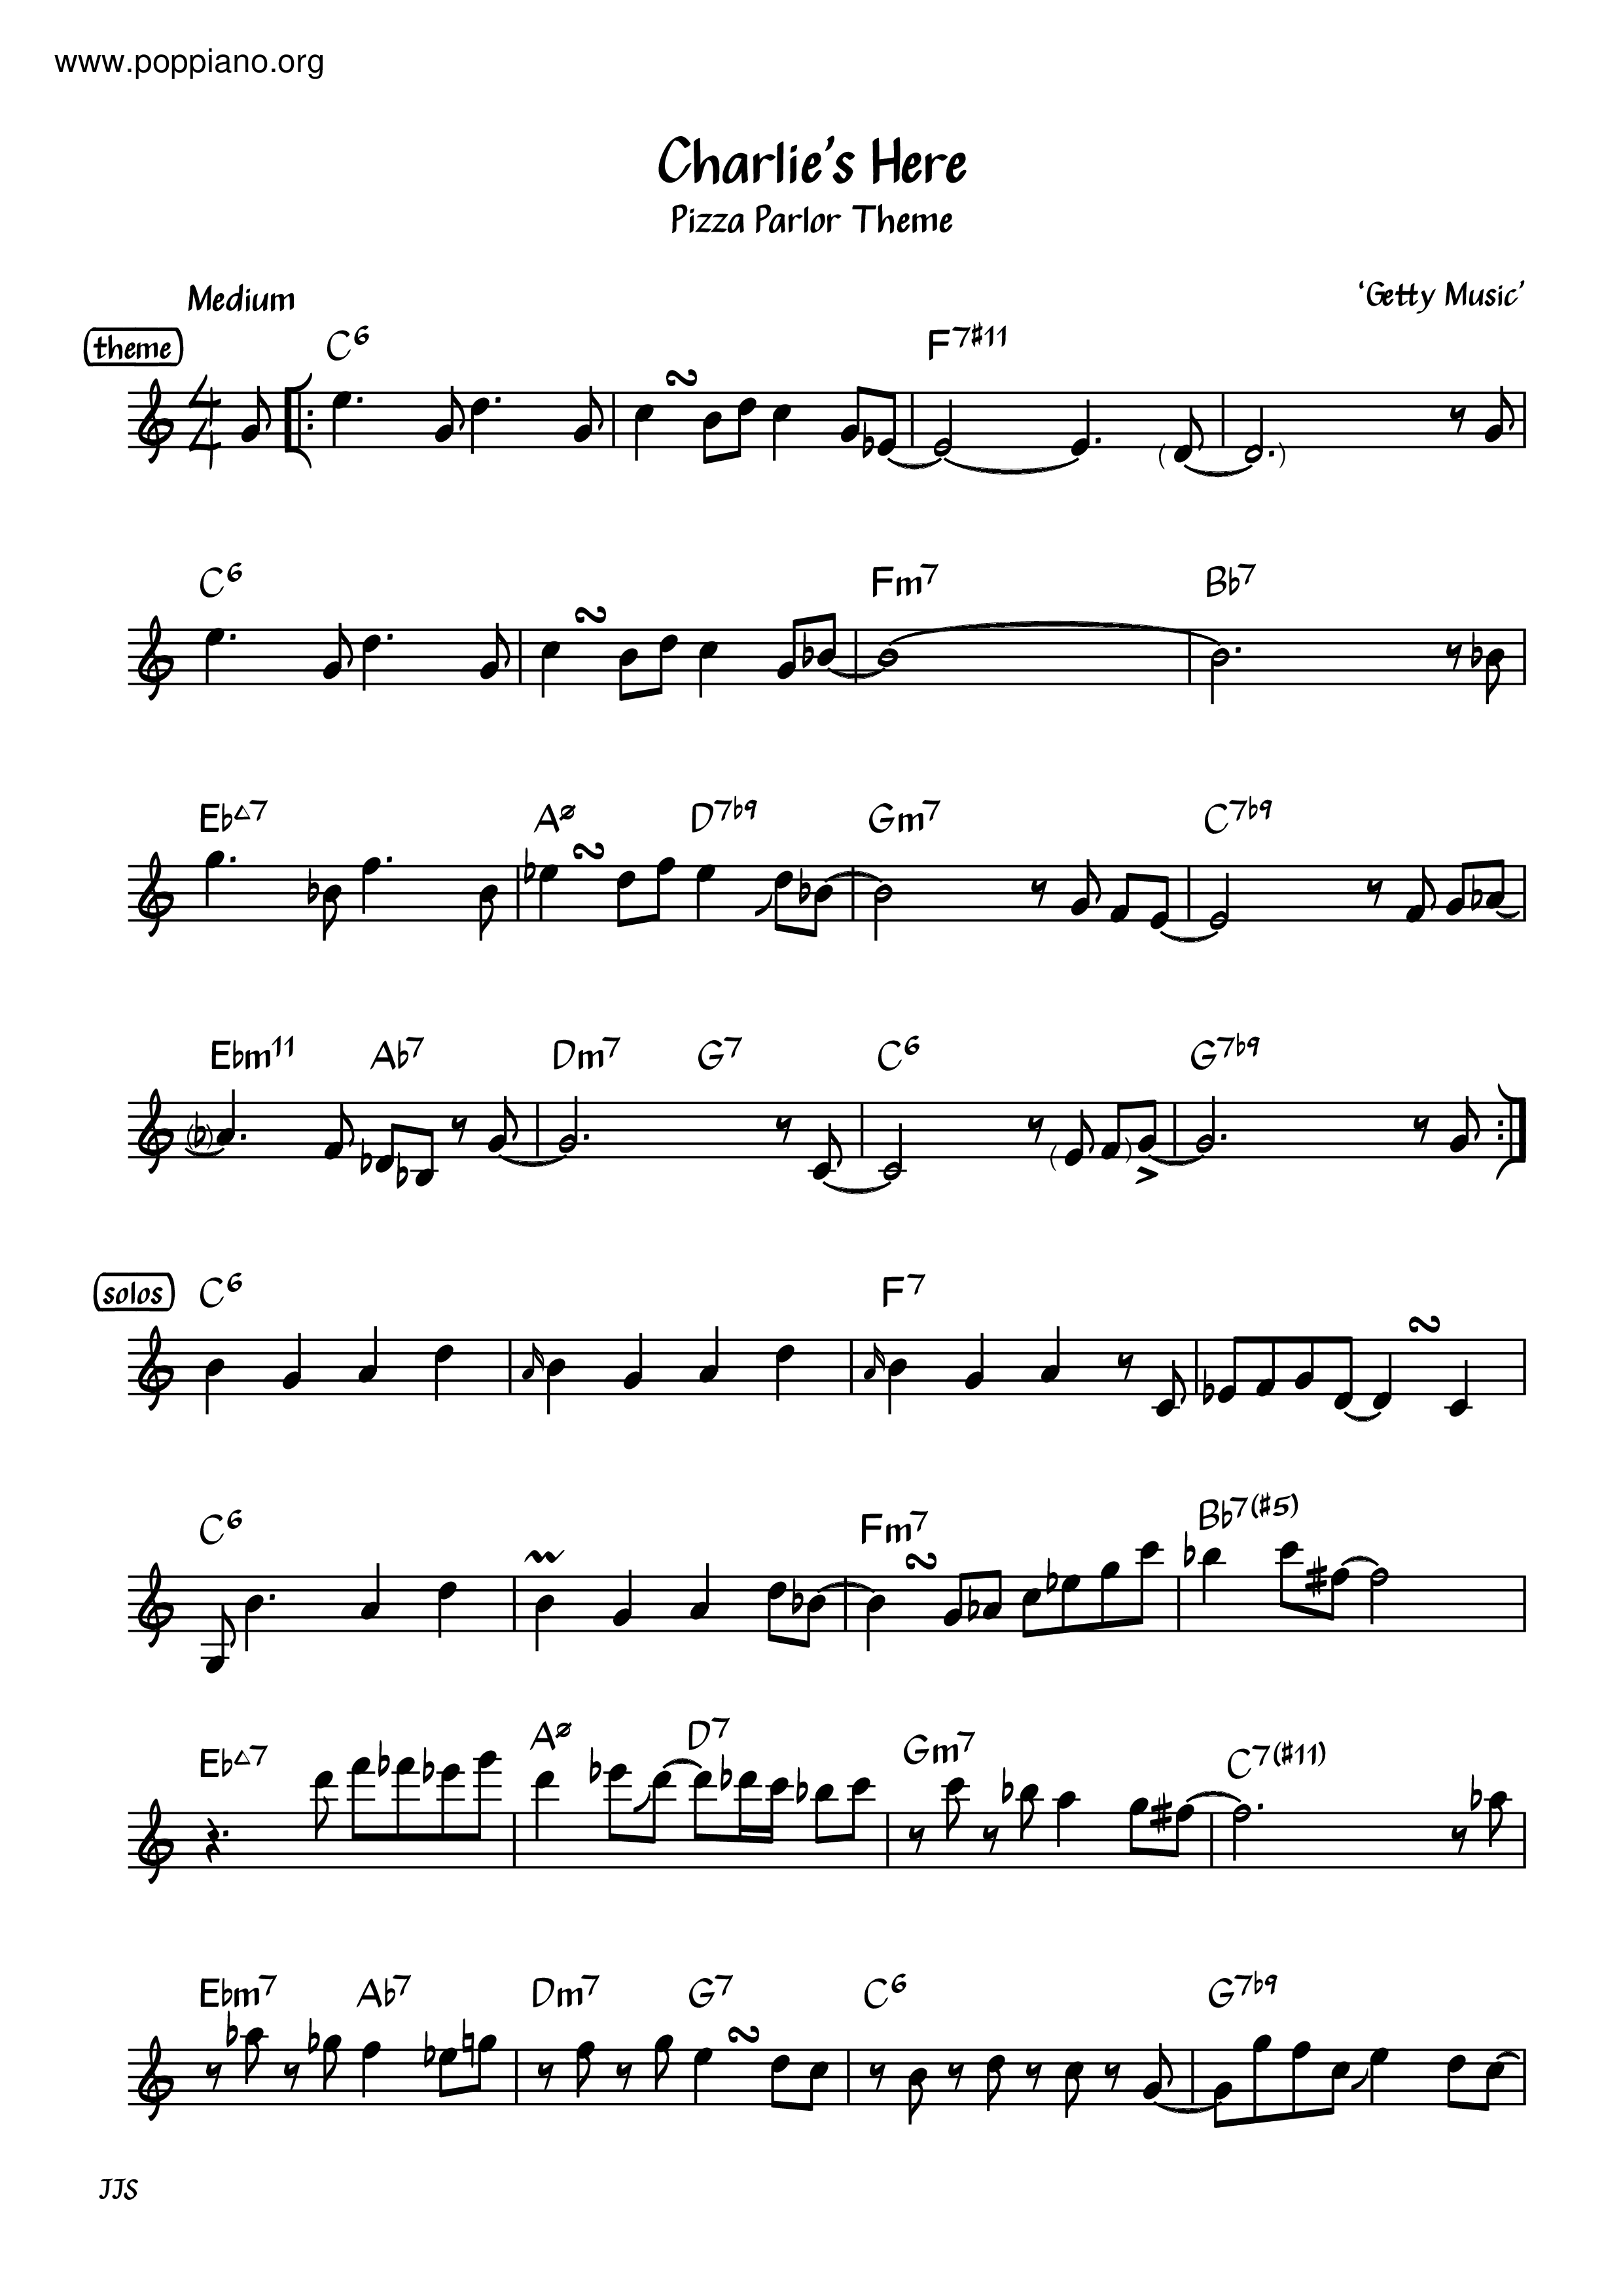 ☆ Club Penguin-Pizza Parlor Theme / Charlie's Here Sheet Music pdf, - Free  Score Download ☆